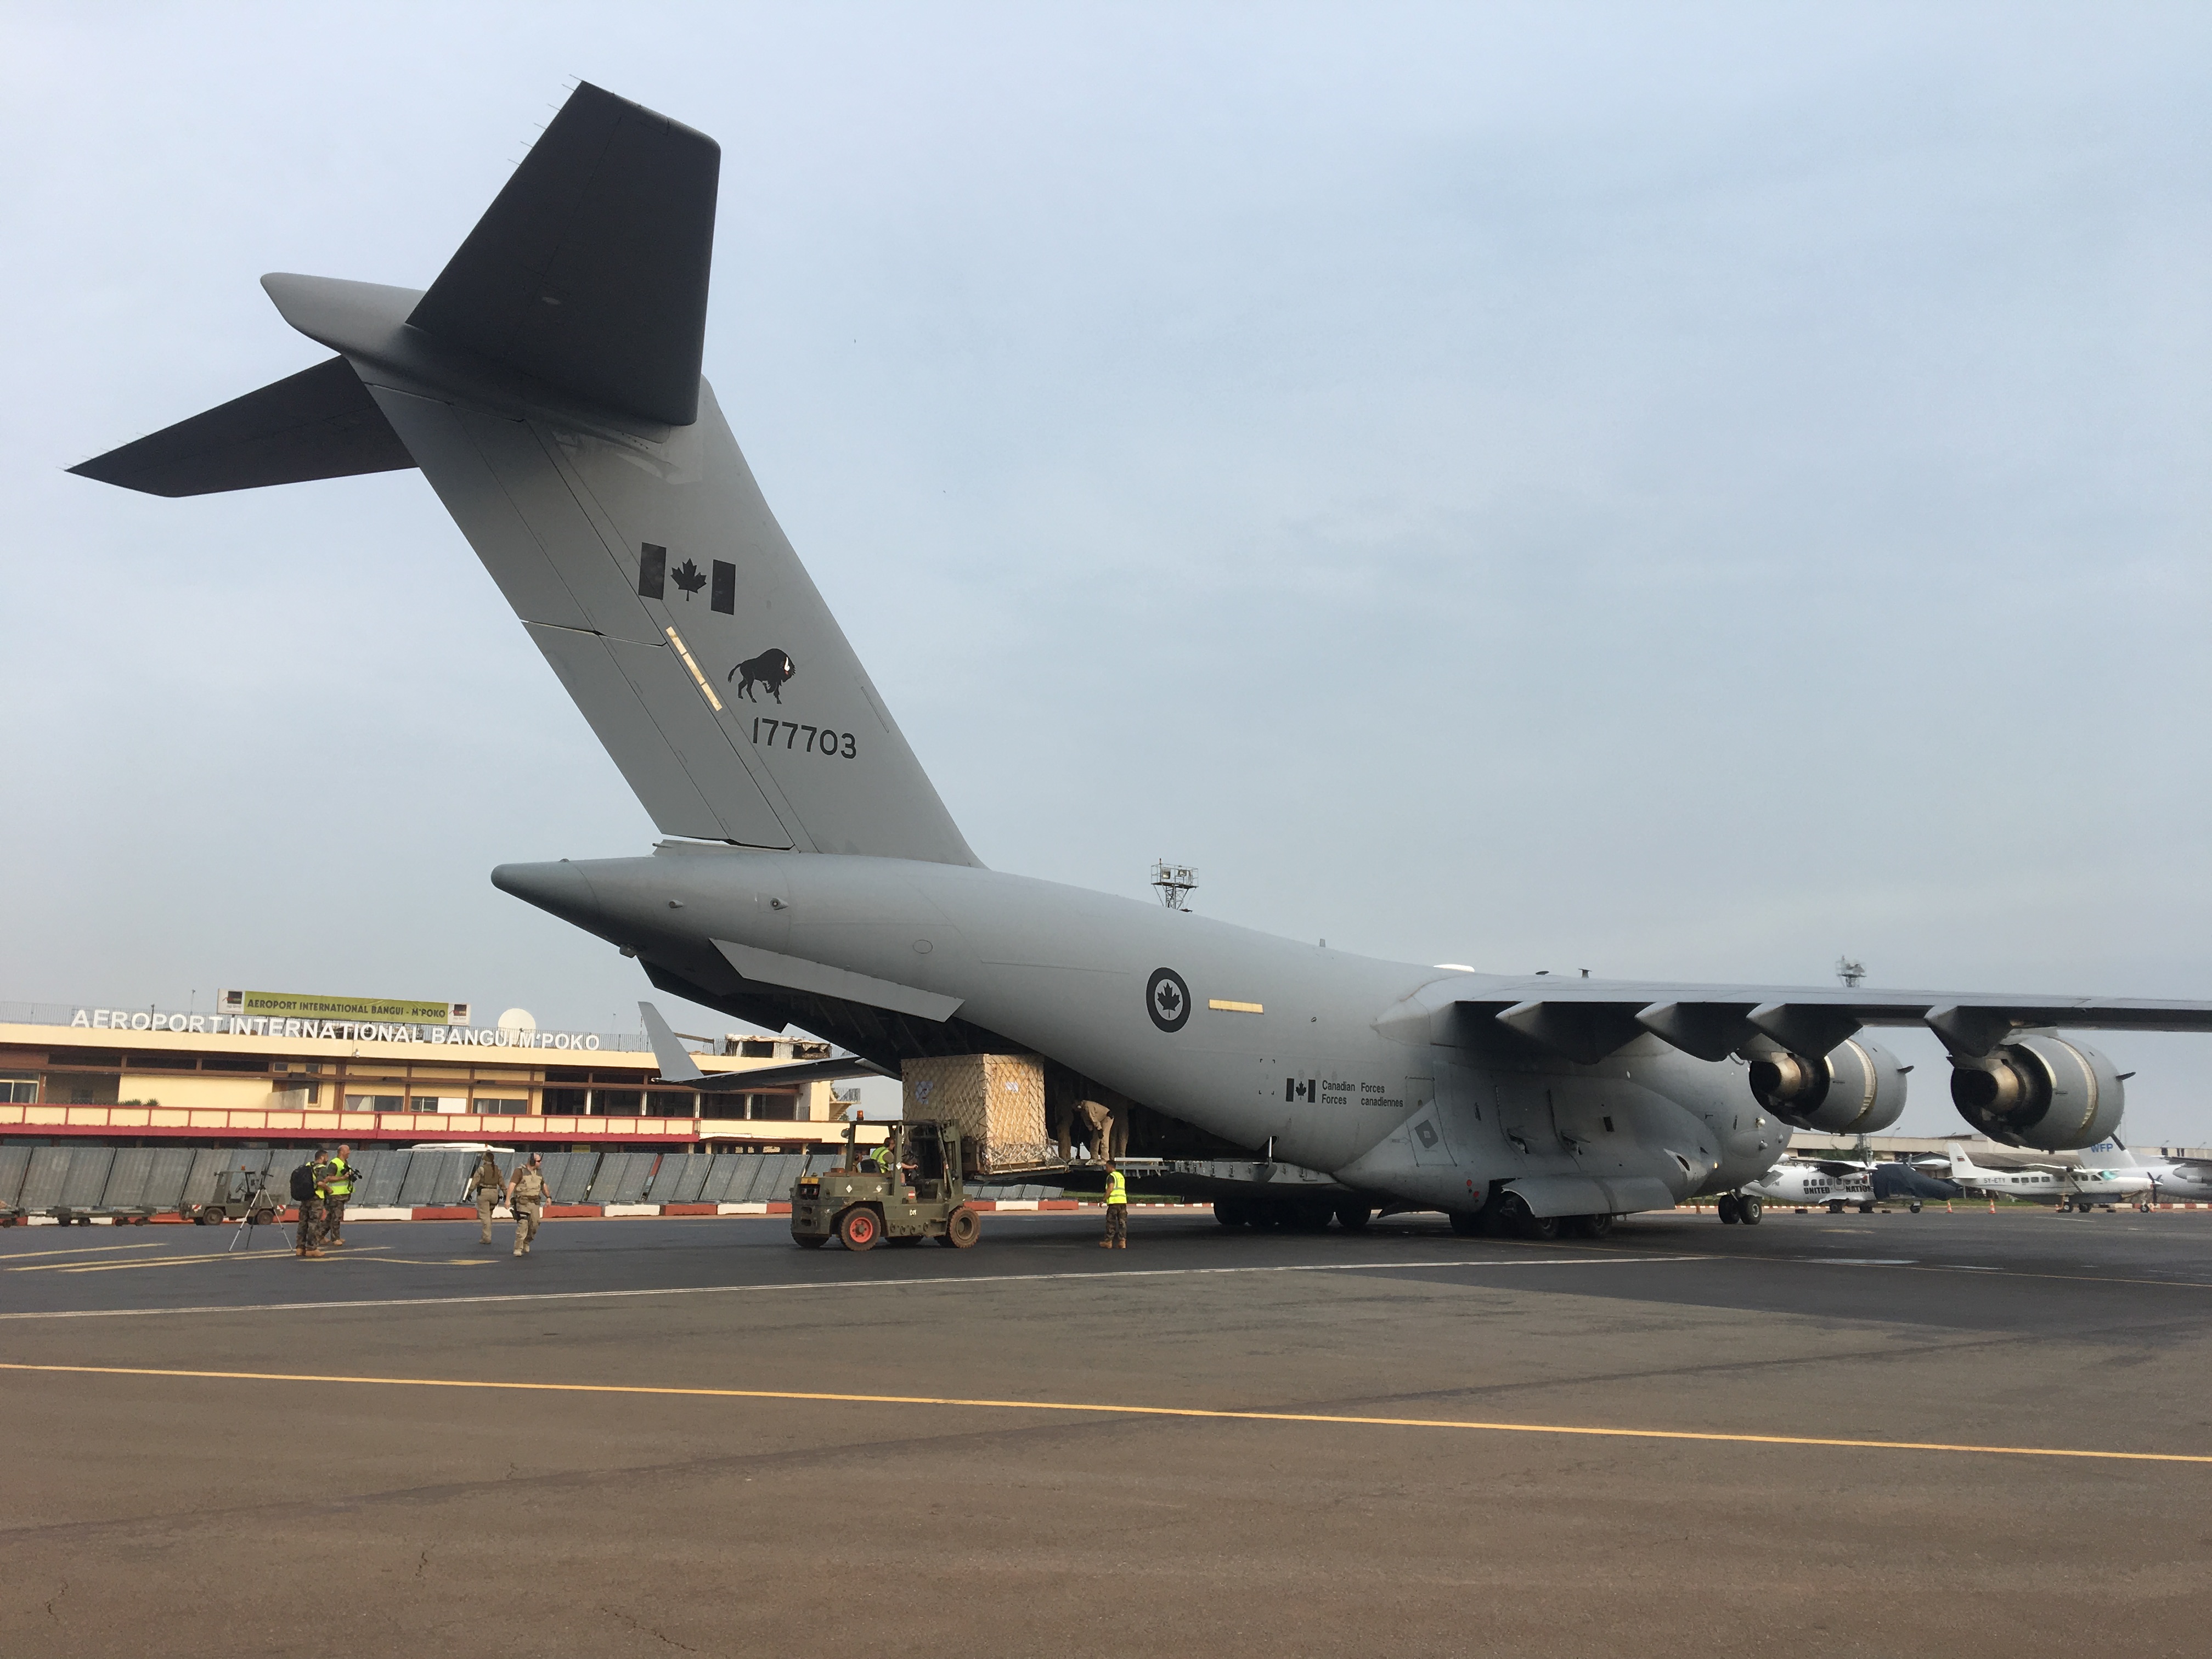 Canadian Armed Forces and French Armed Forces personnel work together to unload equipment from a CC-177 Globemaster aircraft in Central African Republic as part of Operation FREQUENCE Canada’s airlift support to France’s operations in West Africa and the Sahel region.